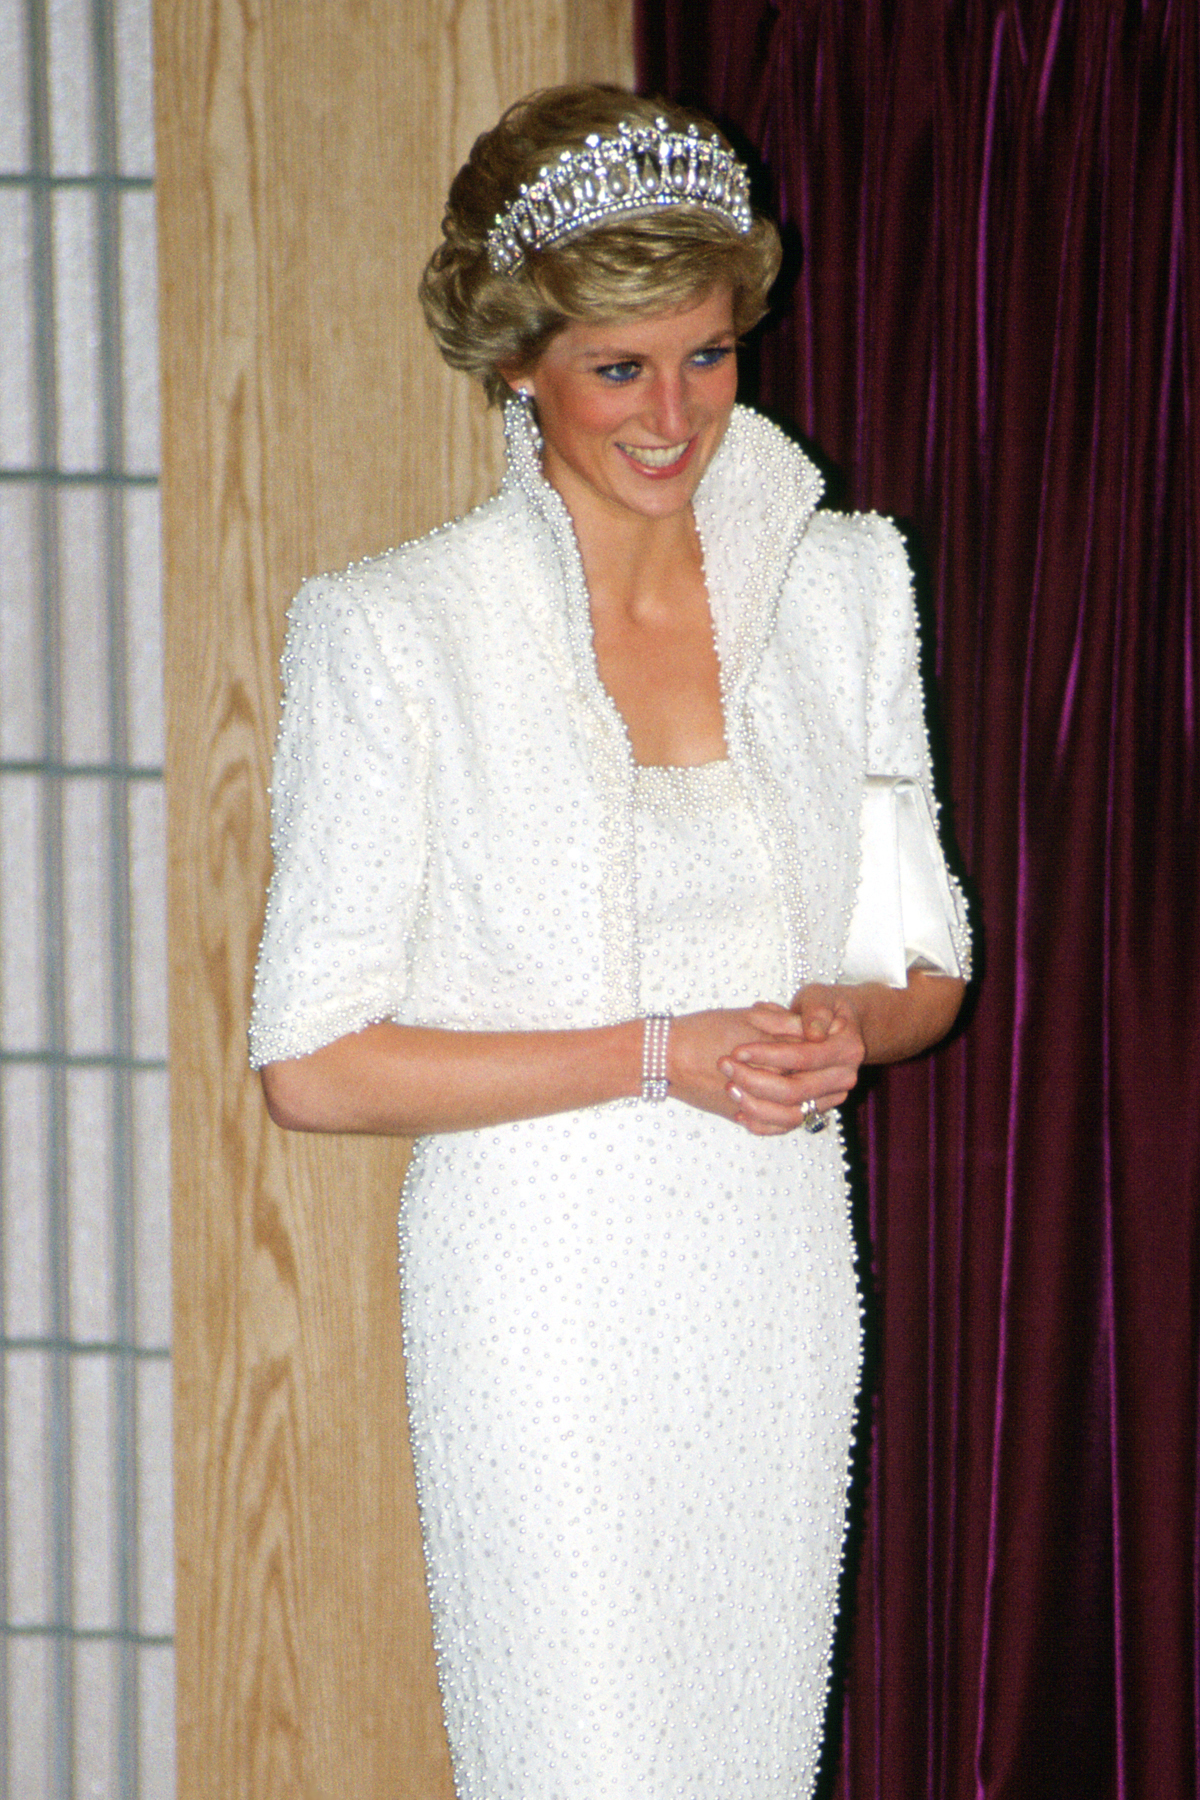 PHOTO: Diana, Princess of Wales wears the "Elvis dress" during a visit to the Culture Center in Hong Kong, Nov. 8, 1989. 